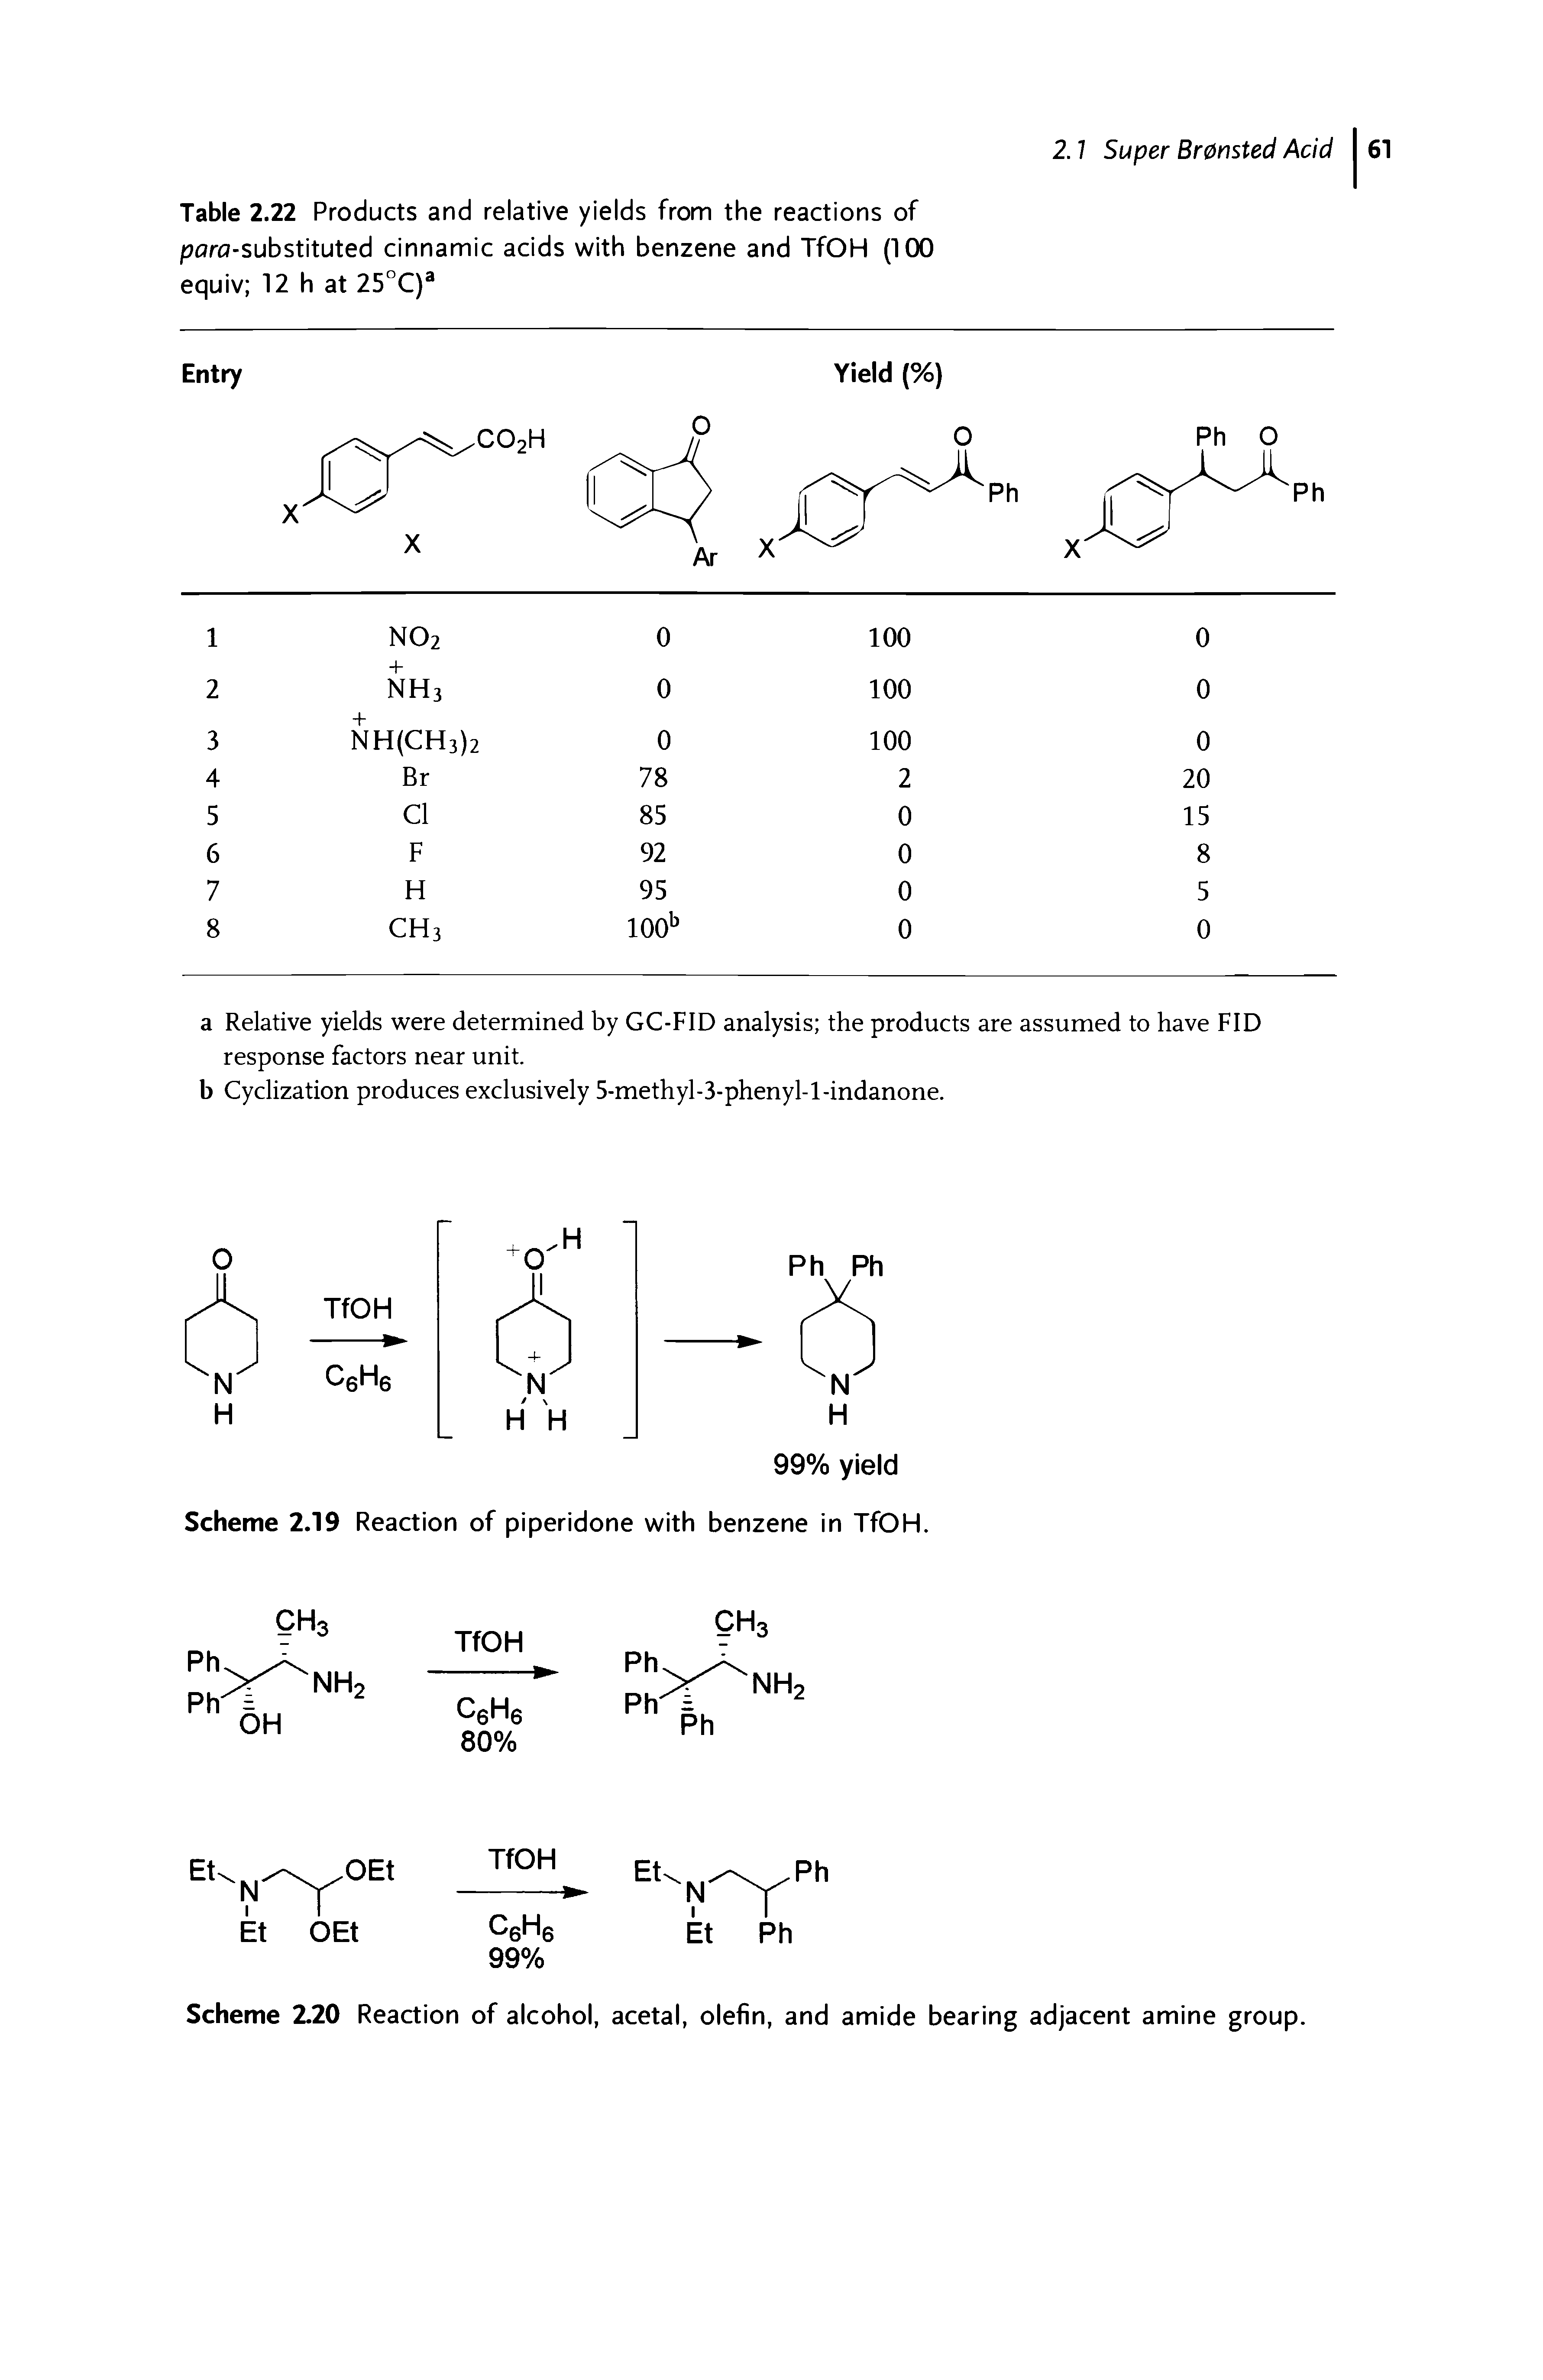 Scheme 2.20 Reaction of alcohol, acetal, olefin, and amide bearing adjacent amine group.